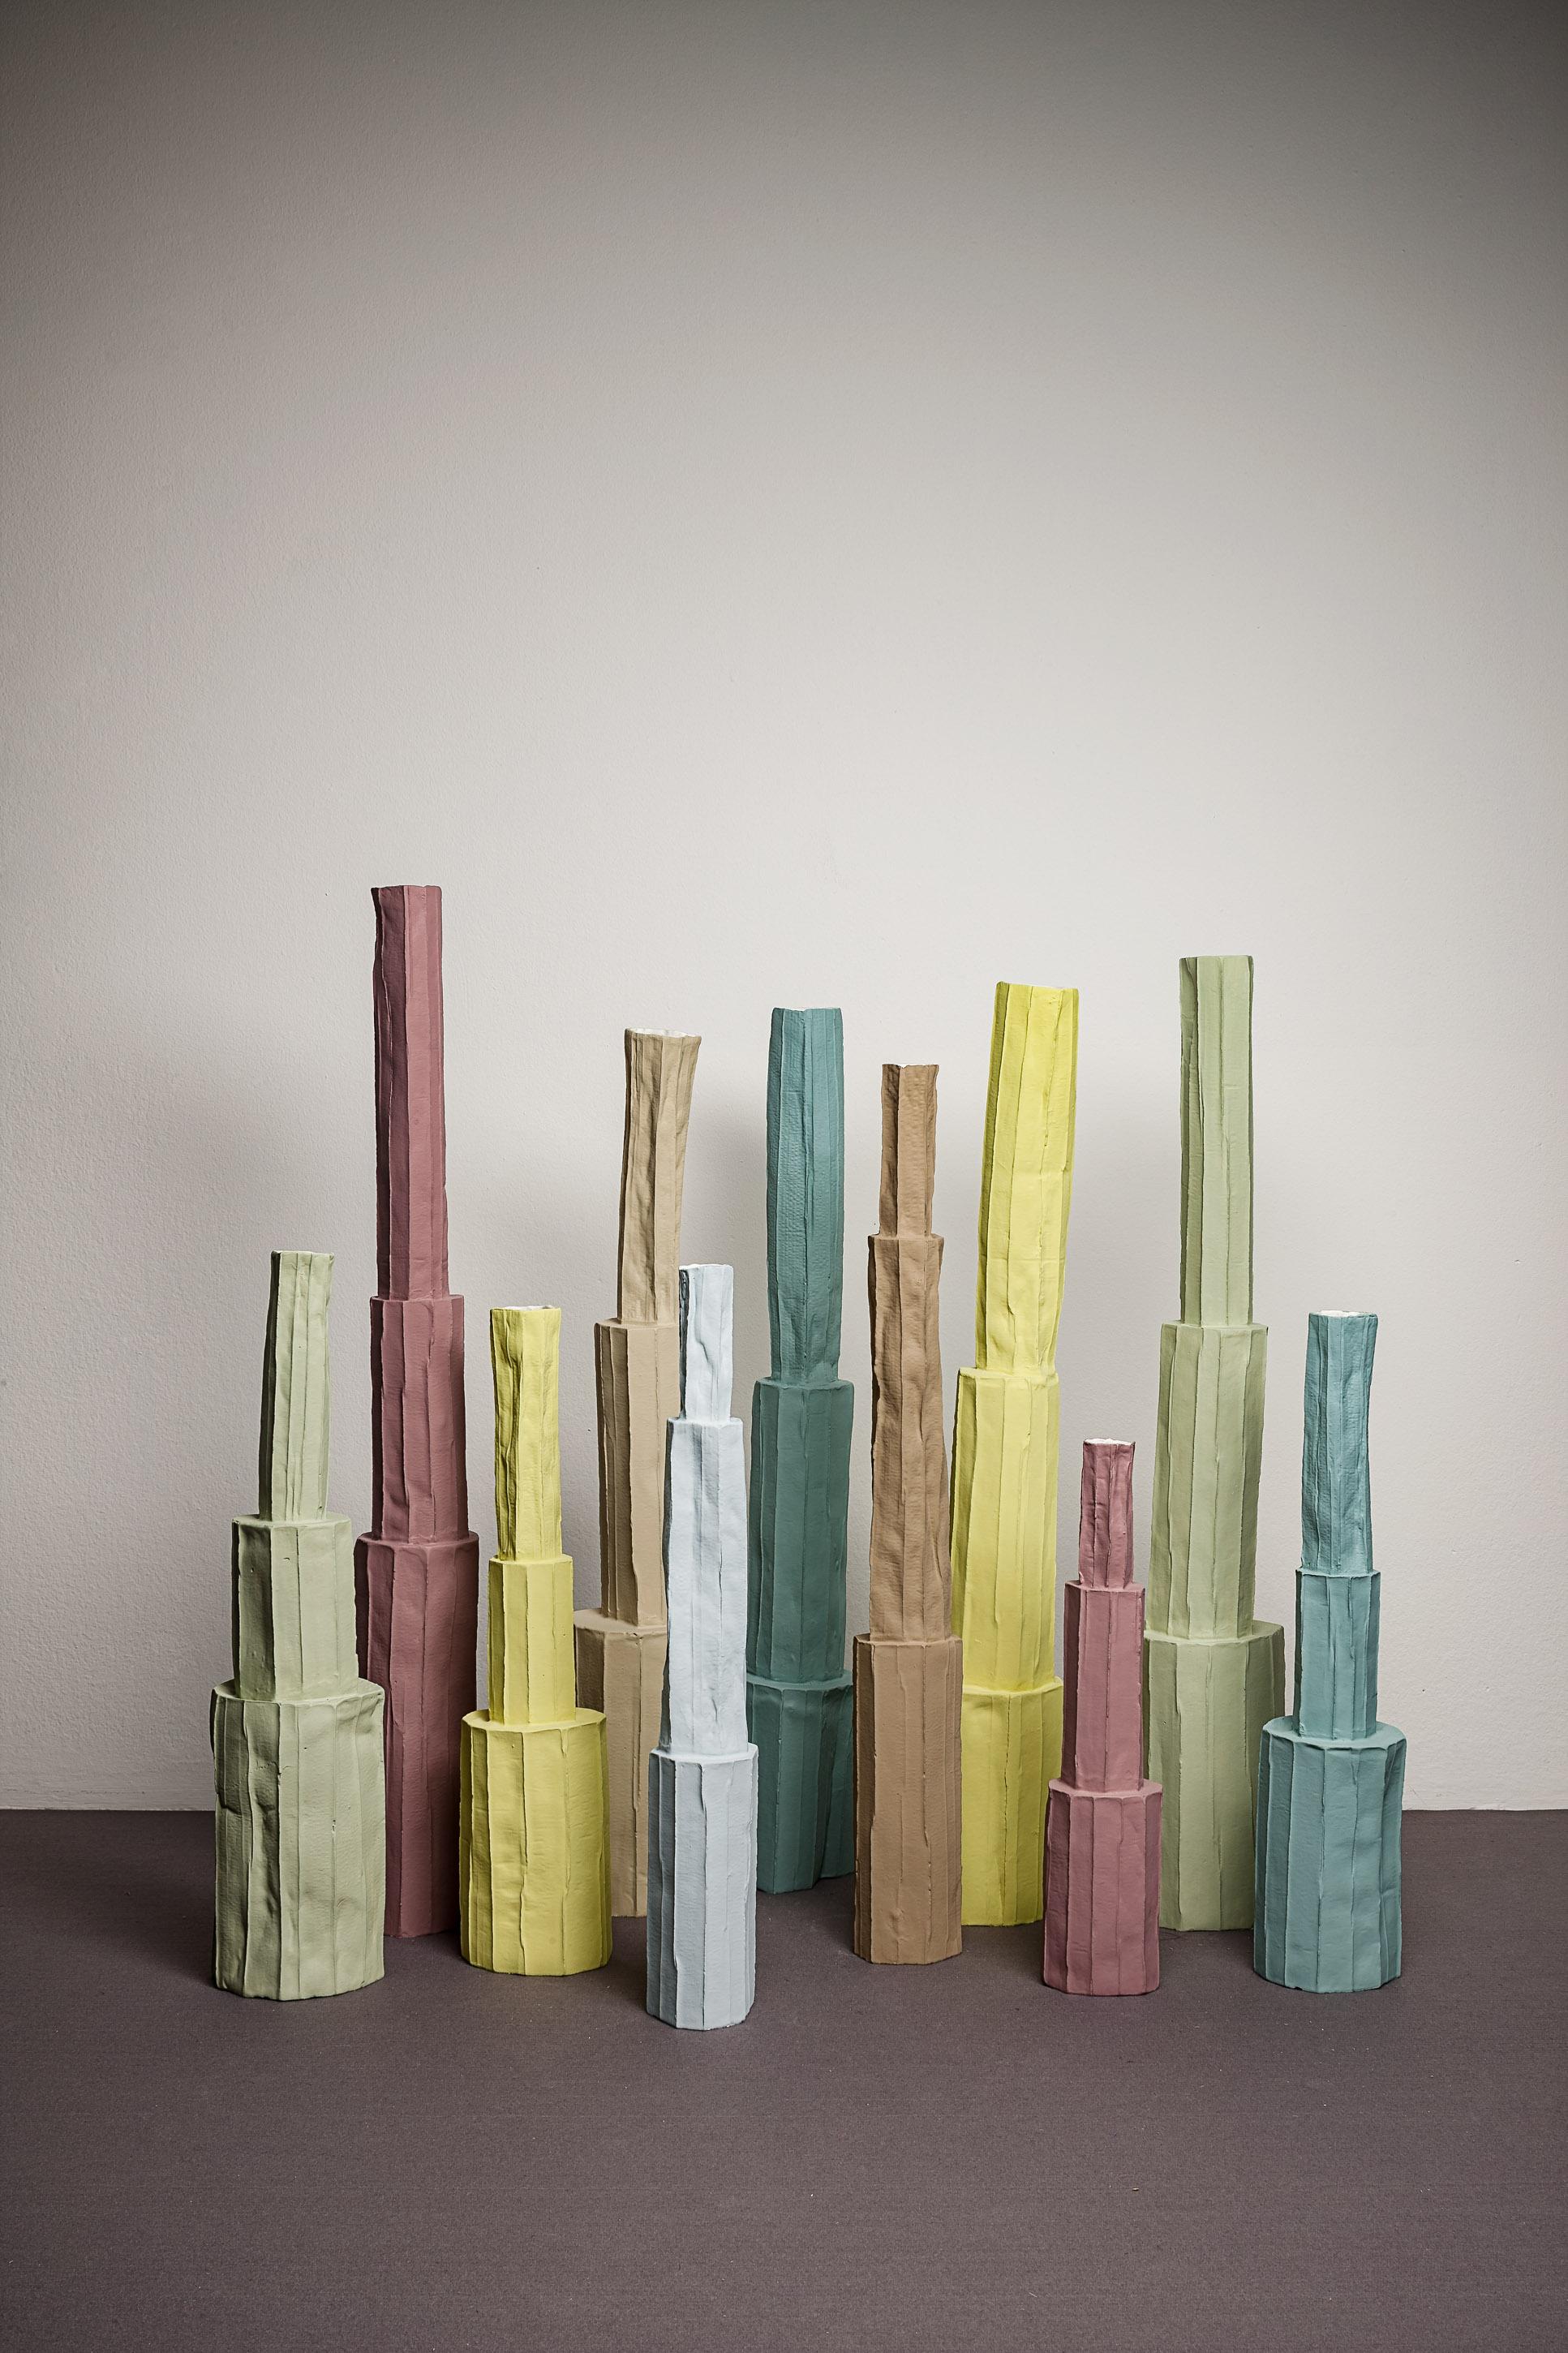 This remarkable piece is part of the Pistillo series of sculptures inspired by flower pistils, handcrafted of paper clay (mixture of clay and paper pulp) using traditional techniques. Finished in varying colors, this unique vase features a large